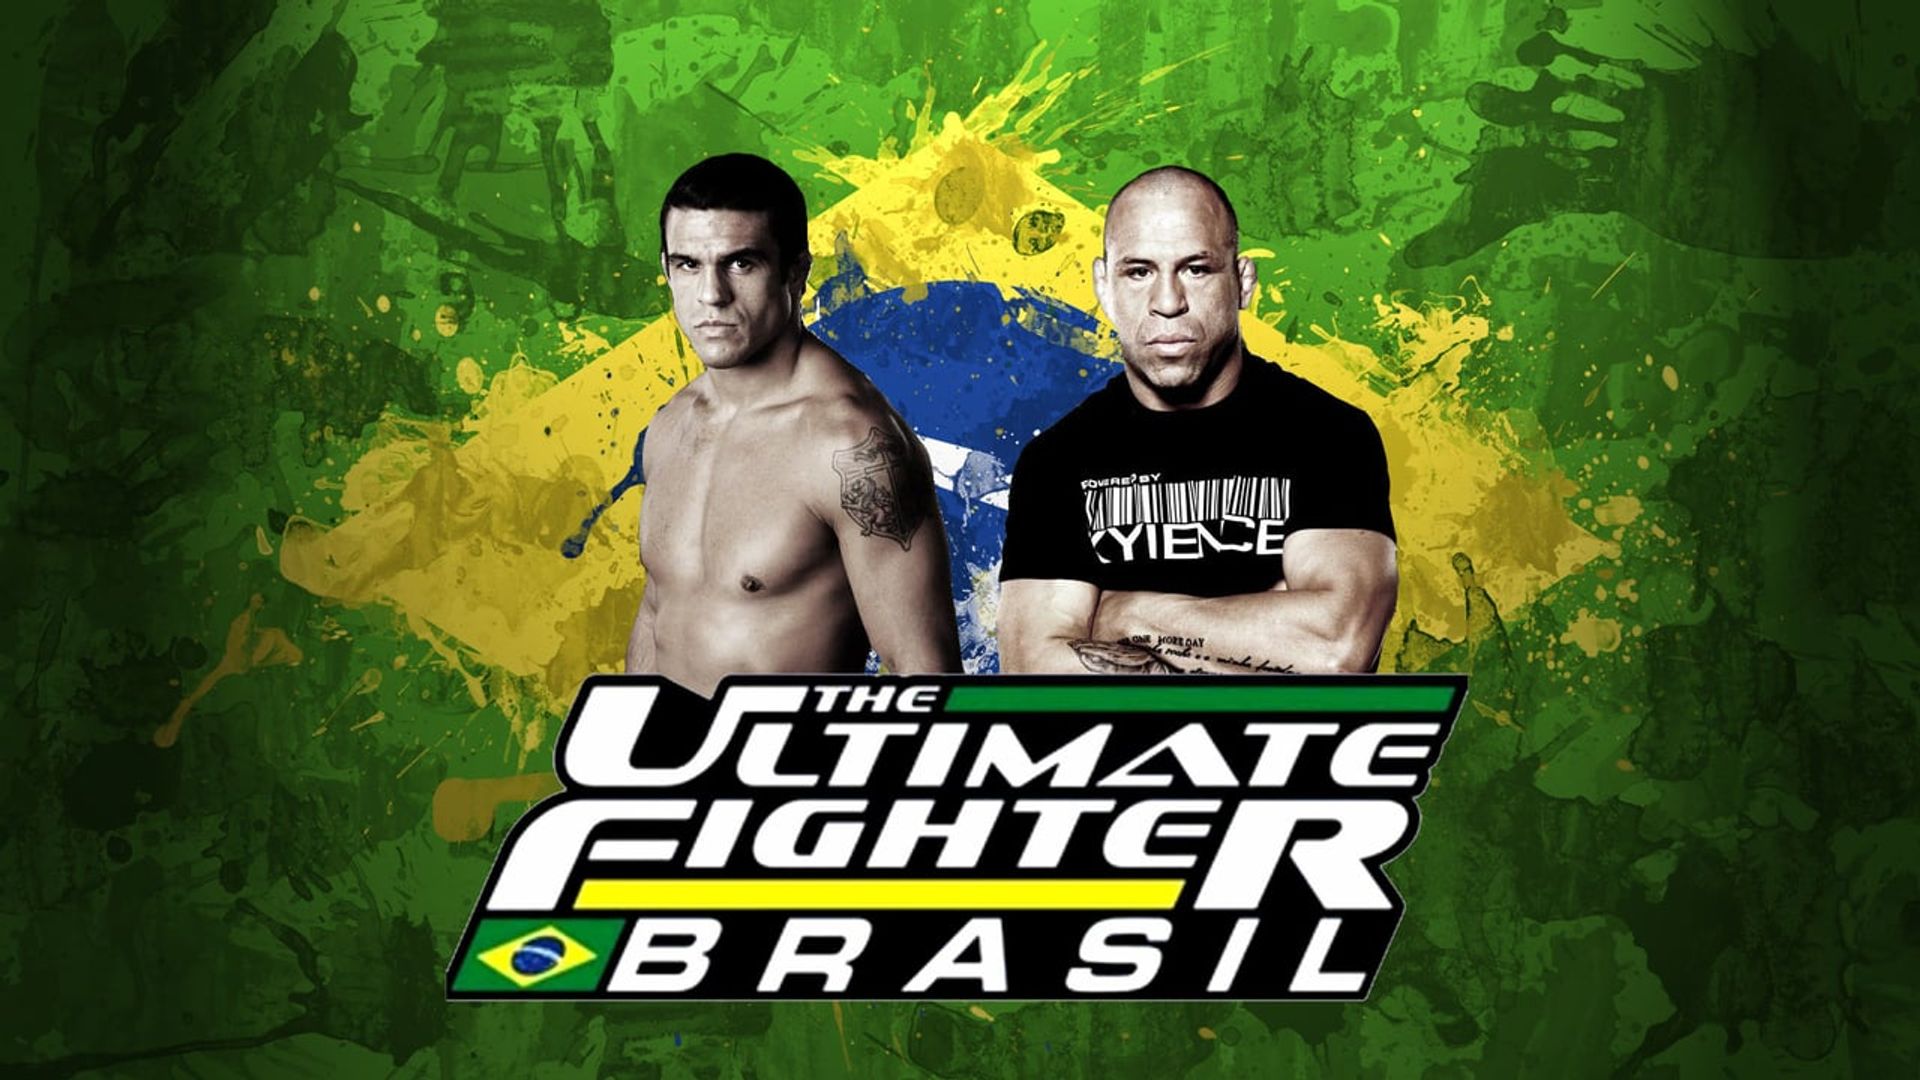 The Ultimate Fighter: Brazil background